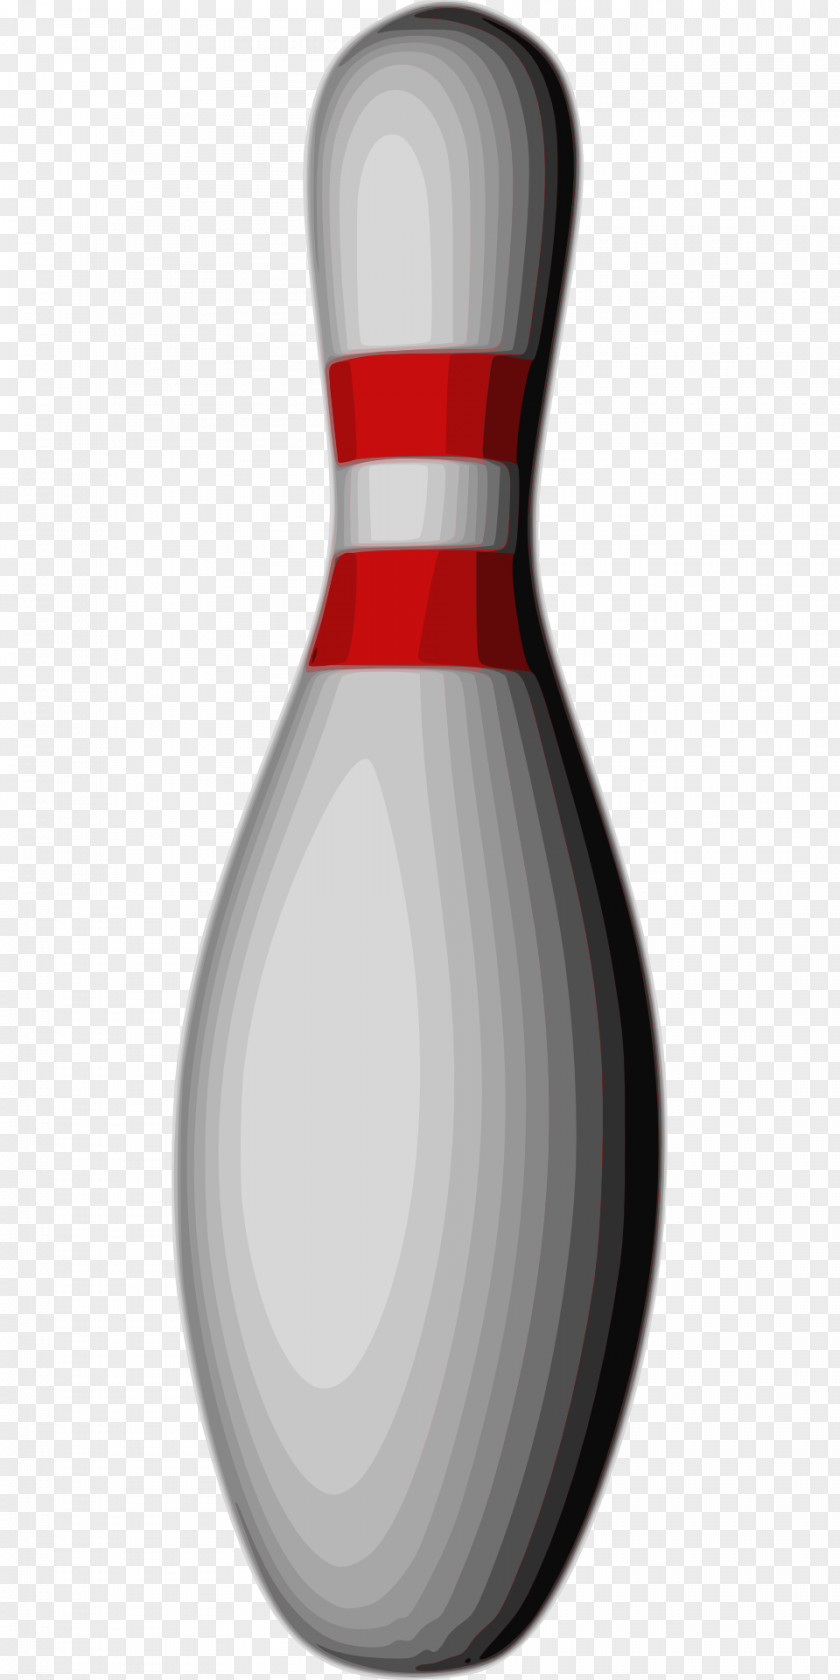 Bowling Pin Product Design Clip Art PNG